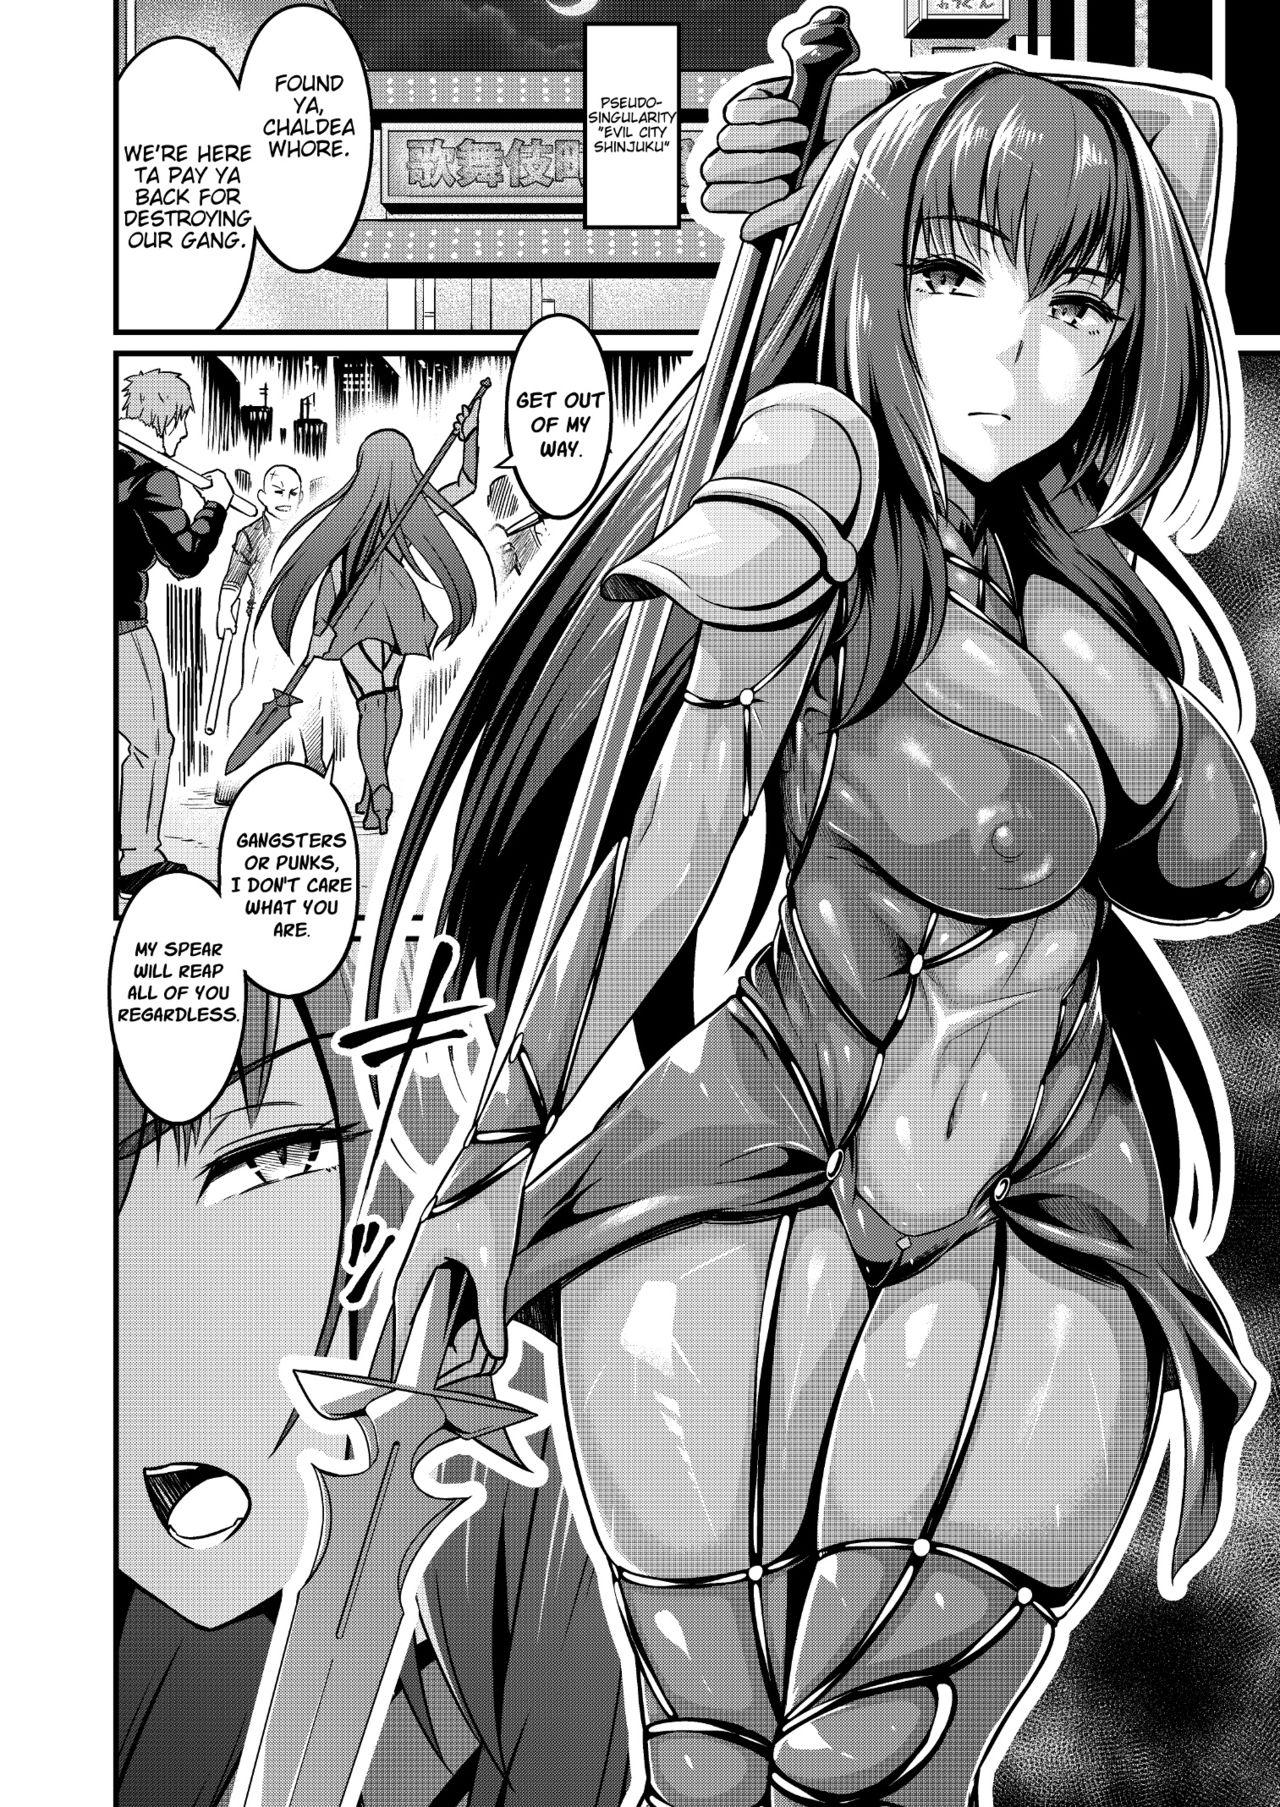 Scathach vs The World 0